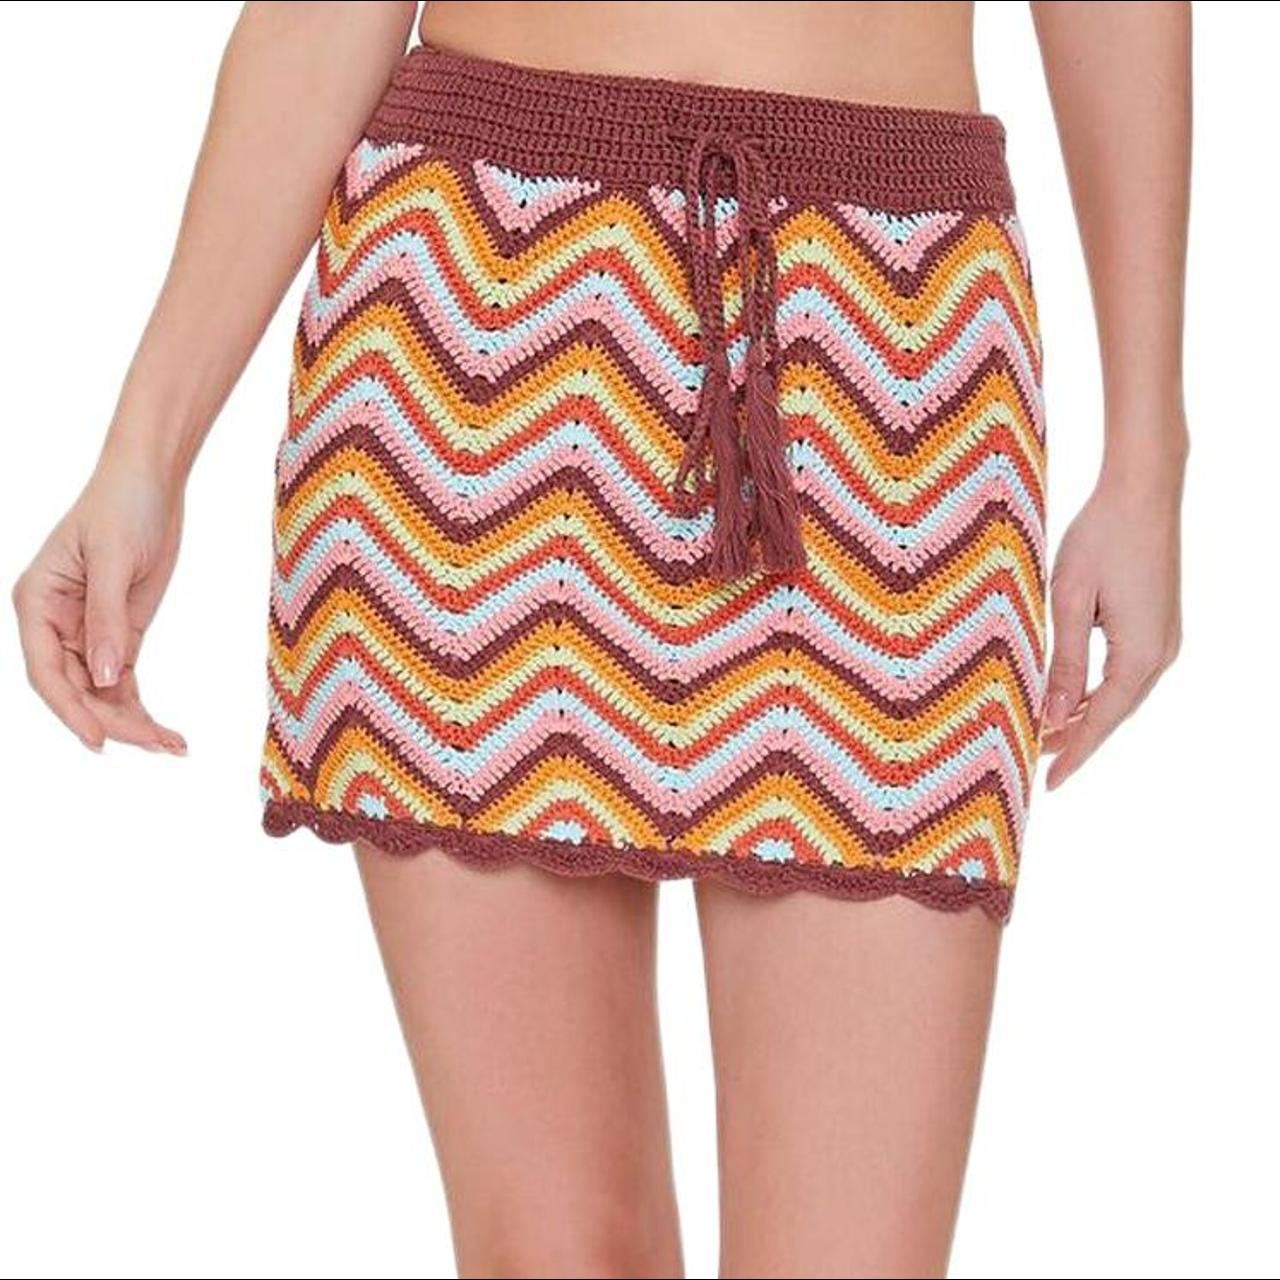 Forever 21 Women's Pink and Brown Skirt | Depop